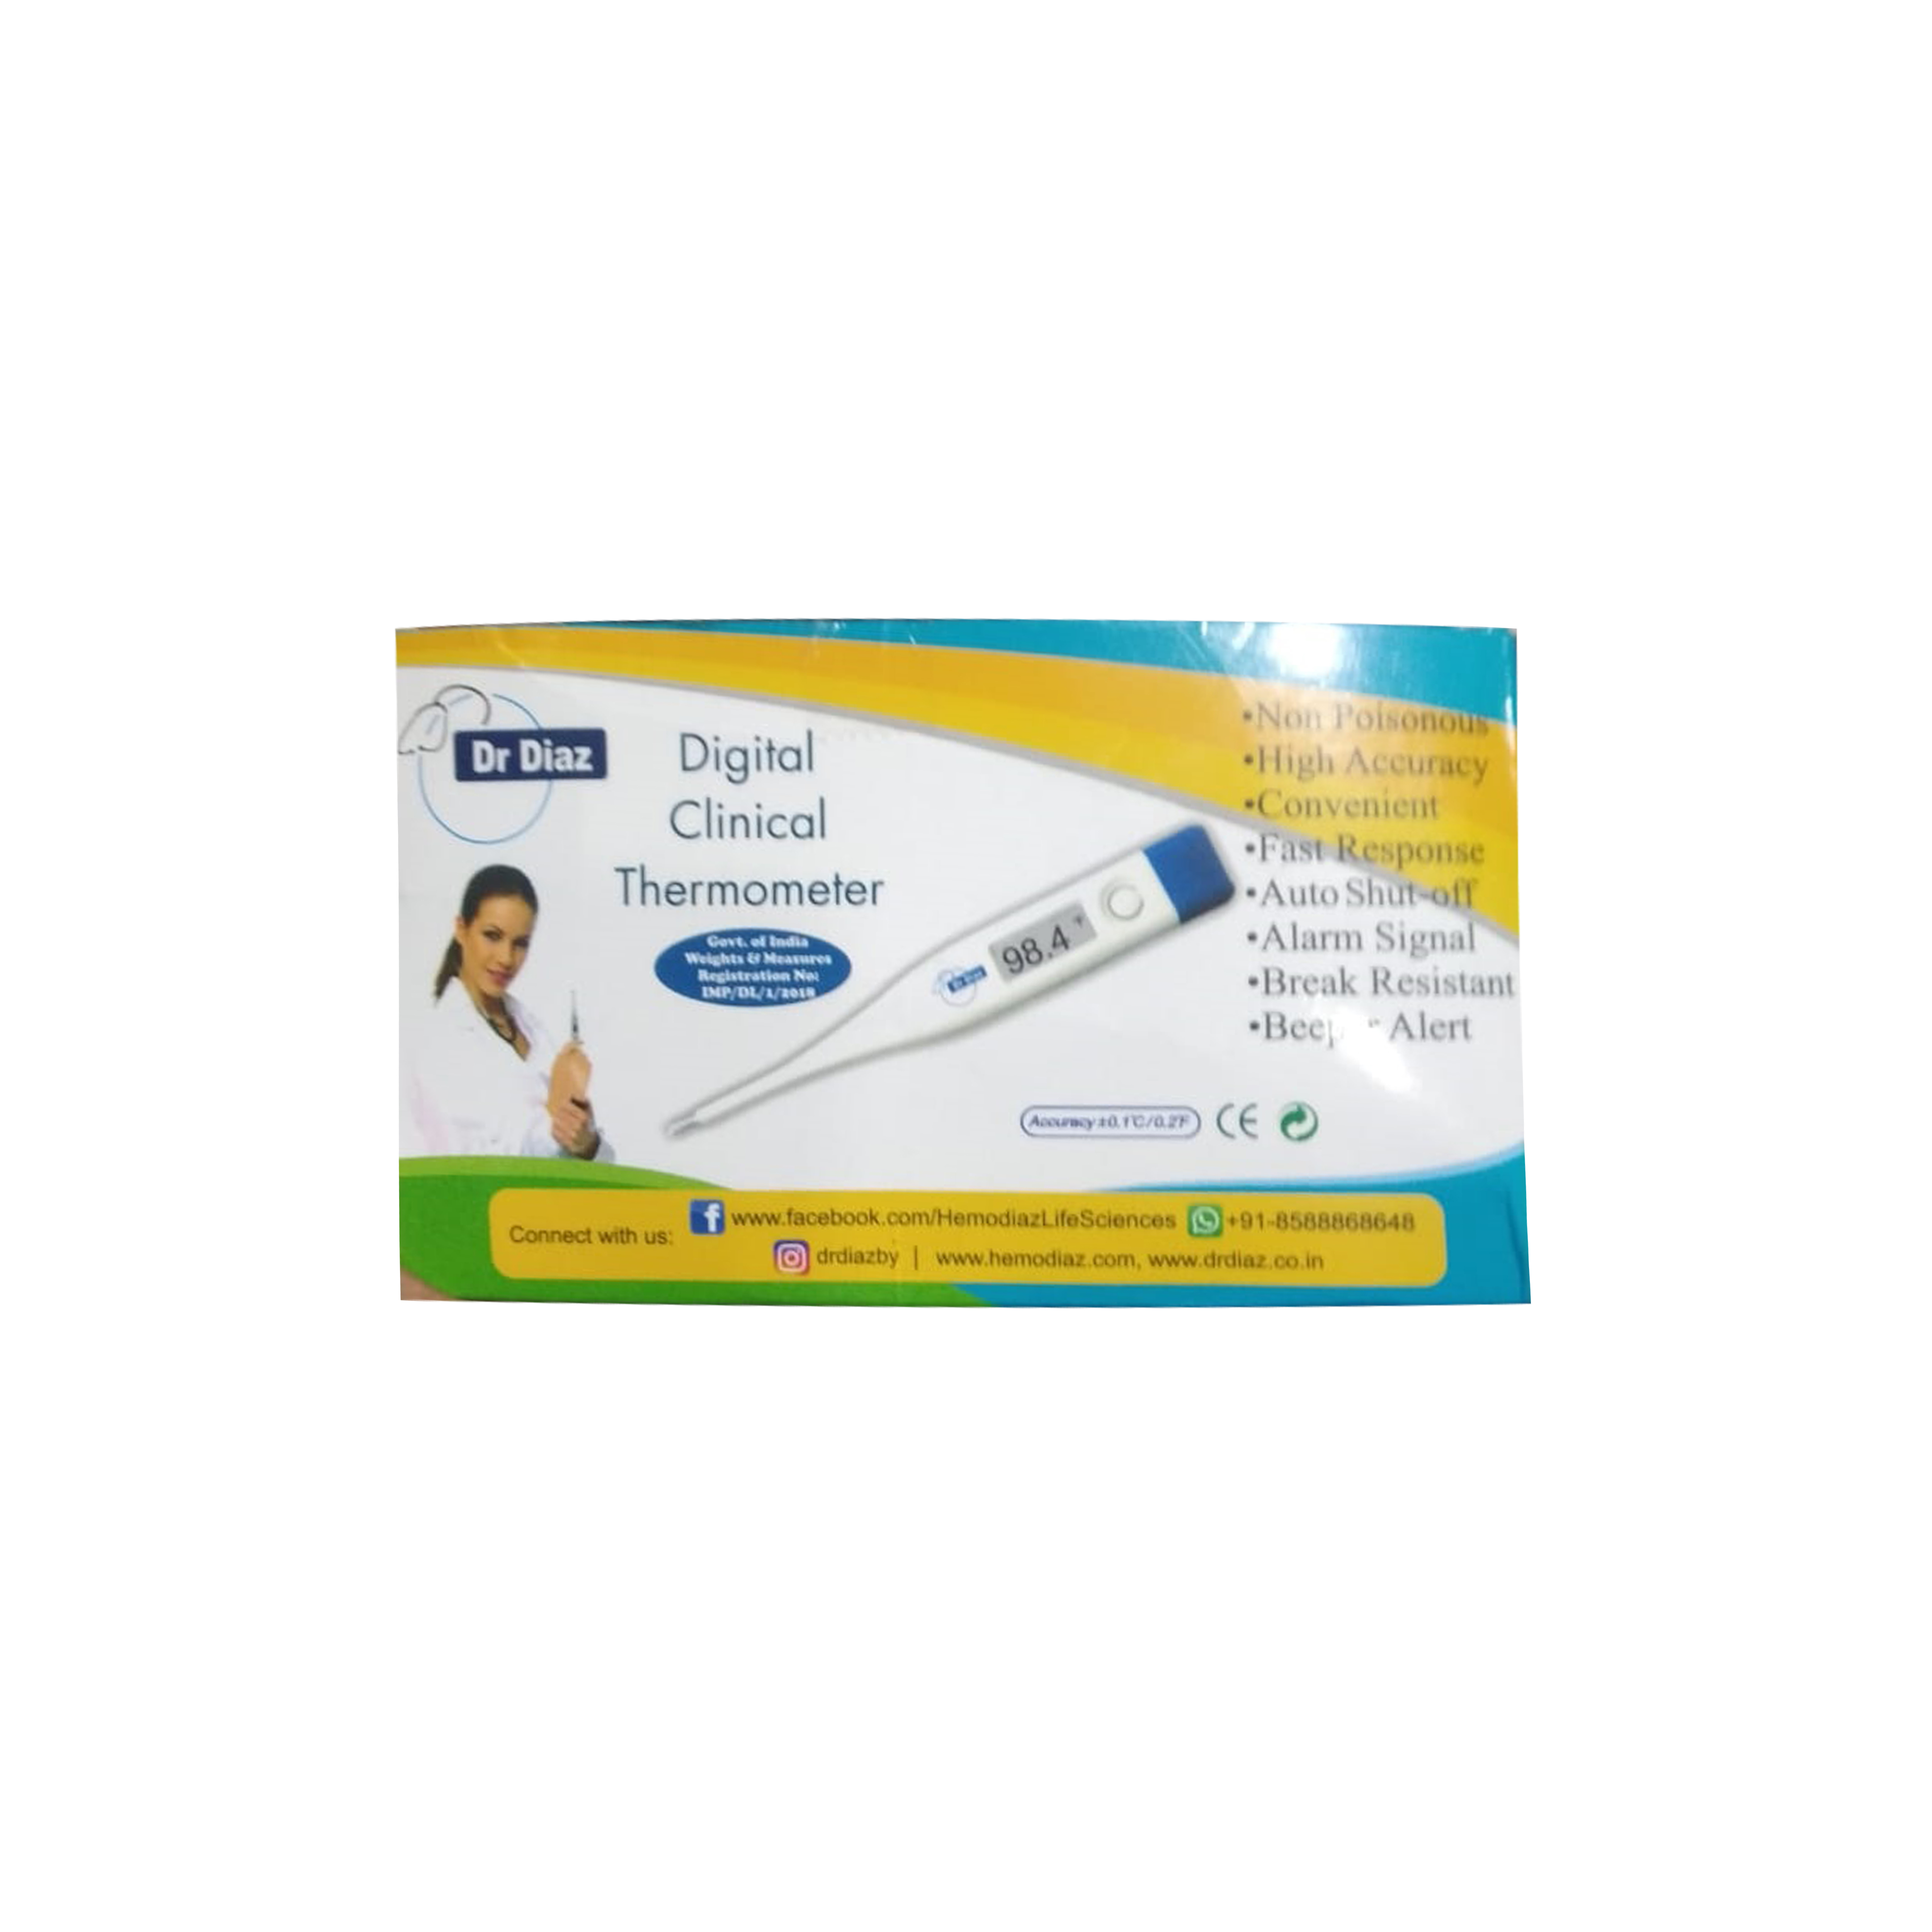 Buy Digital Thermometer at Best Price Online